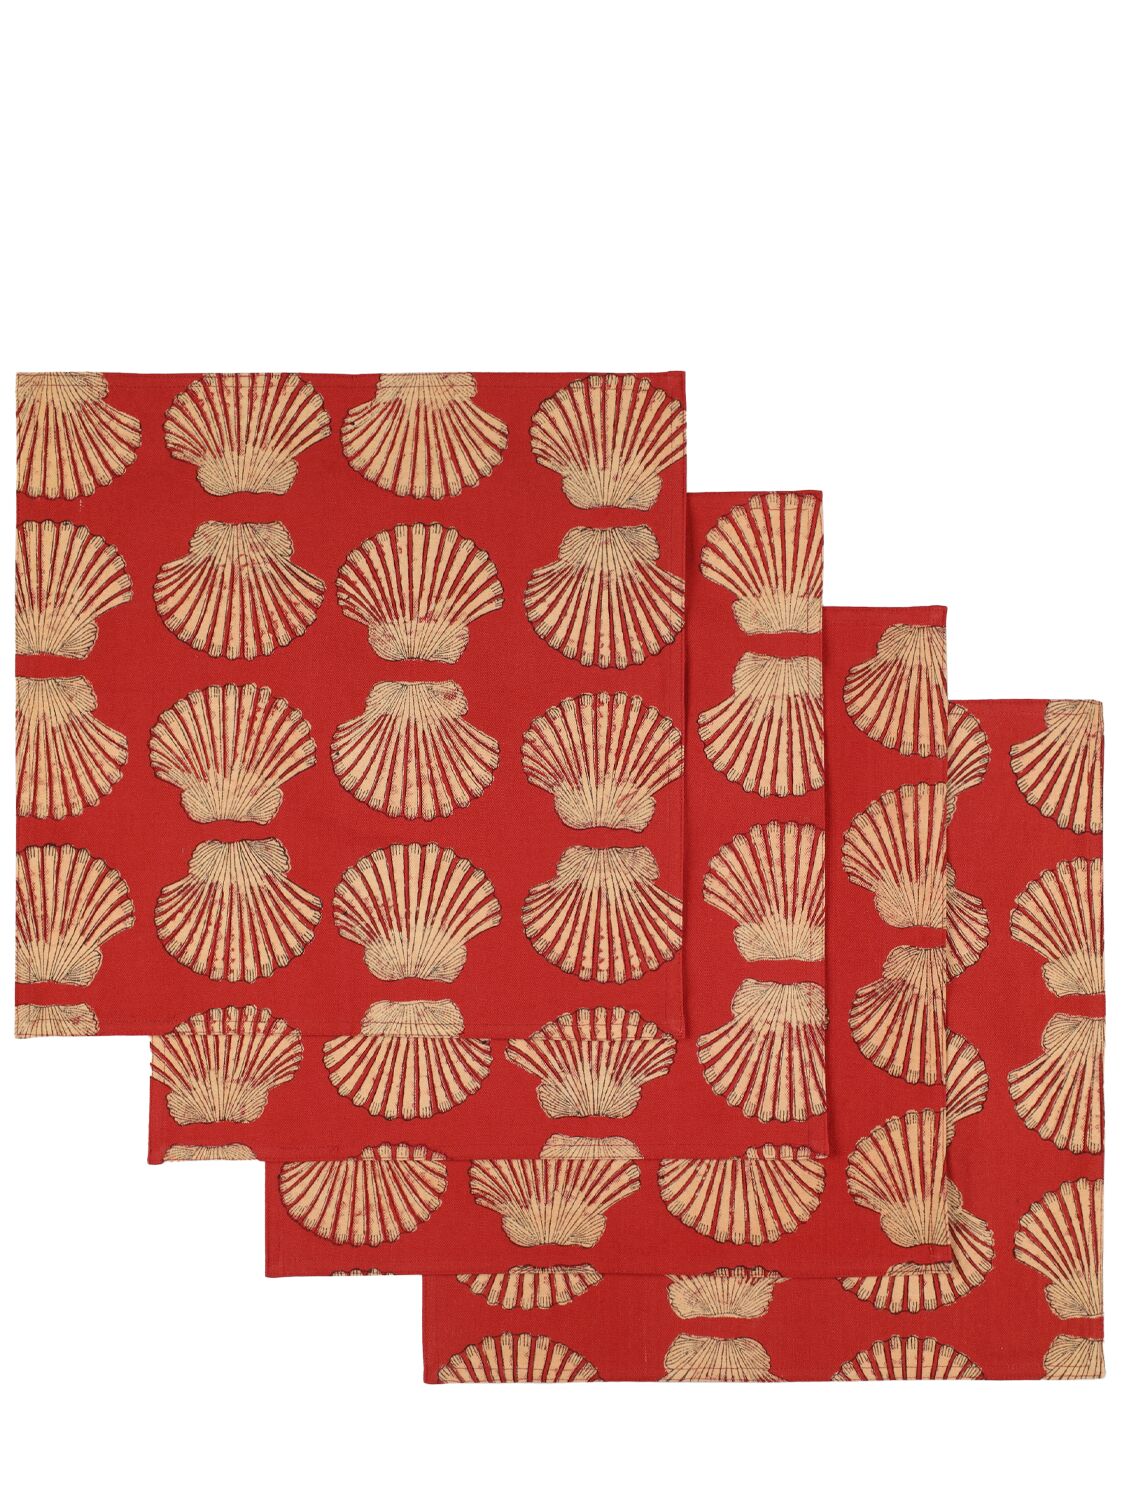 Les Ottomans Set Of 4 Hand-printed Cotton Napkins In Red